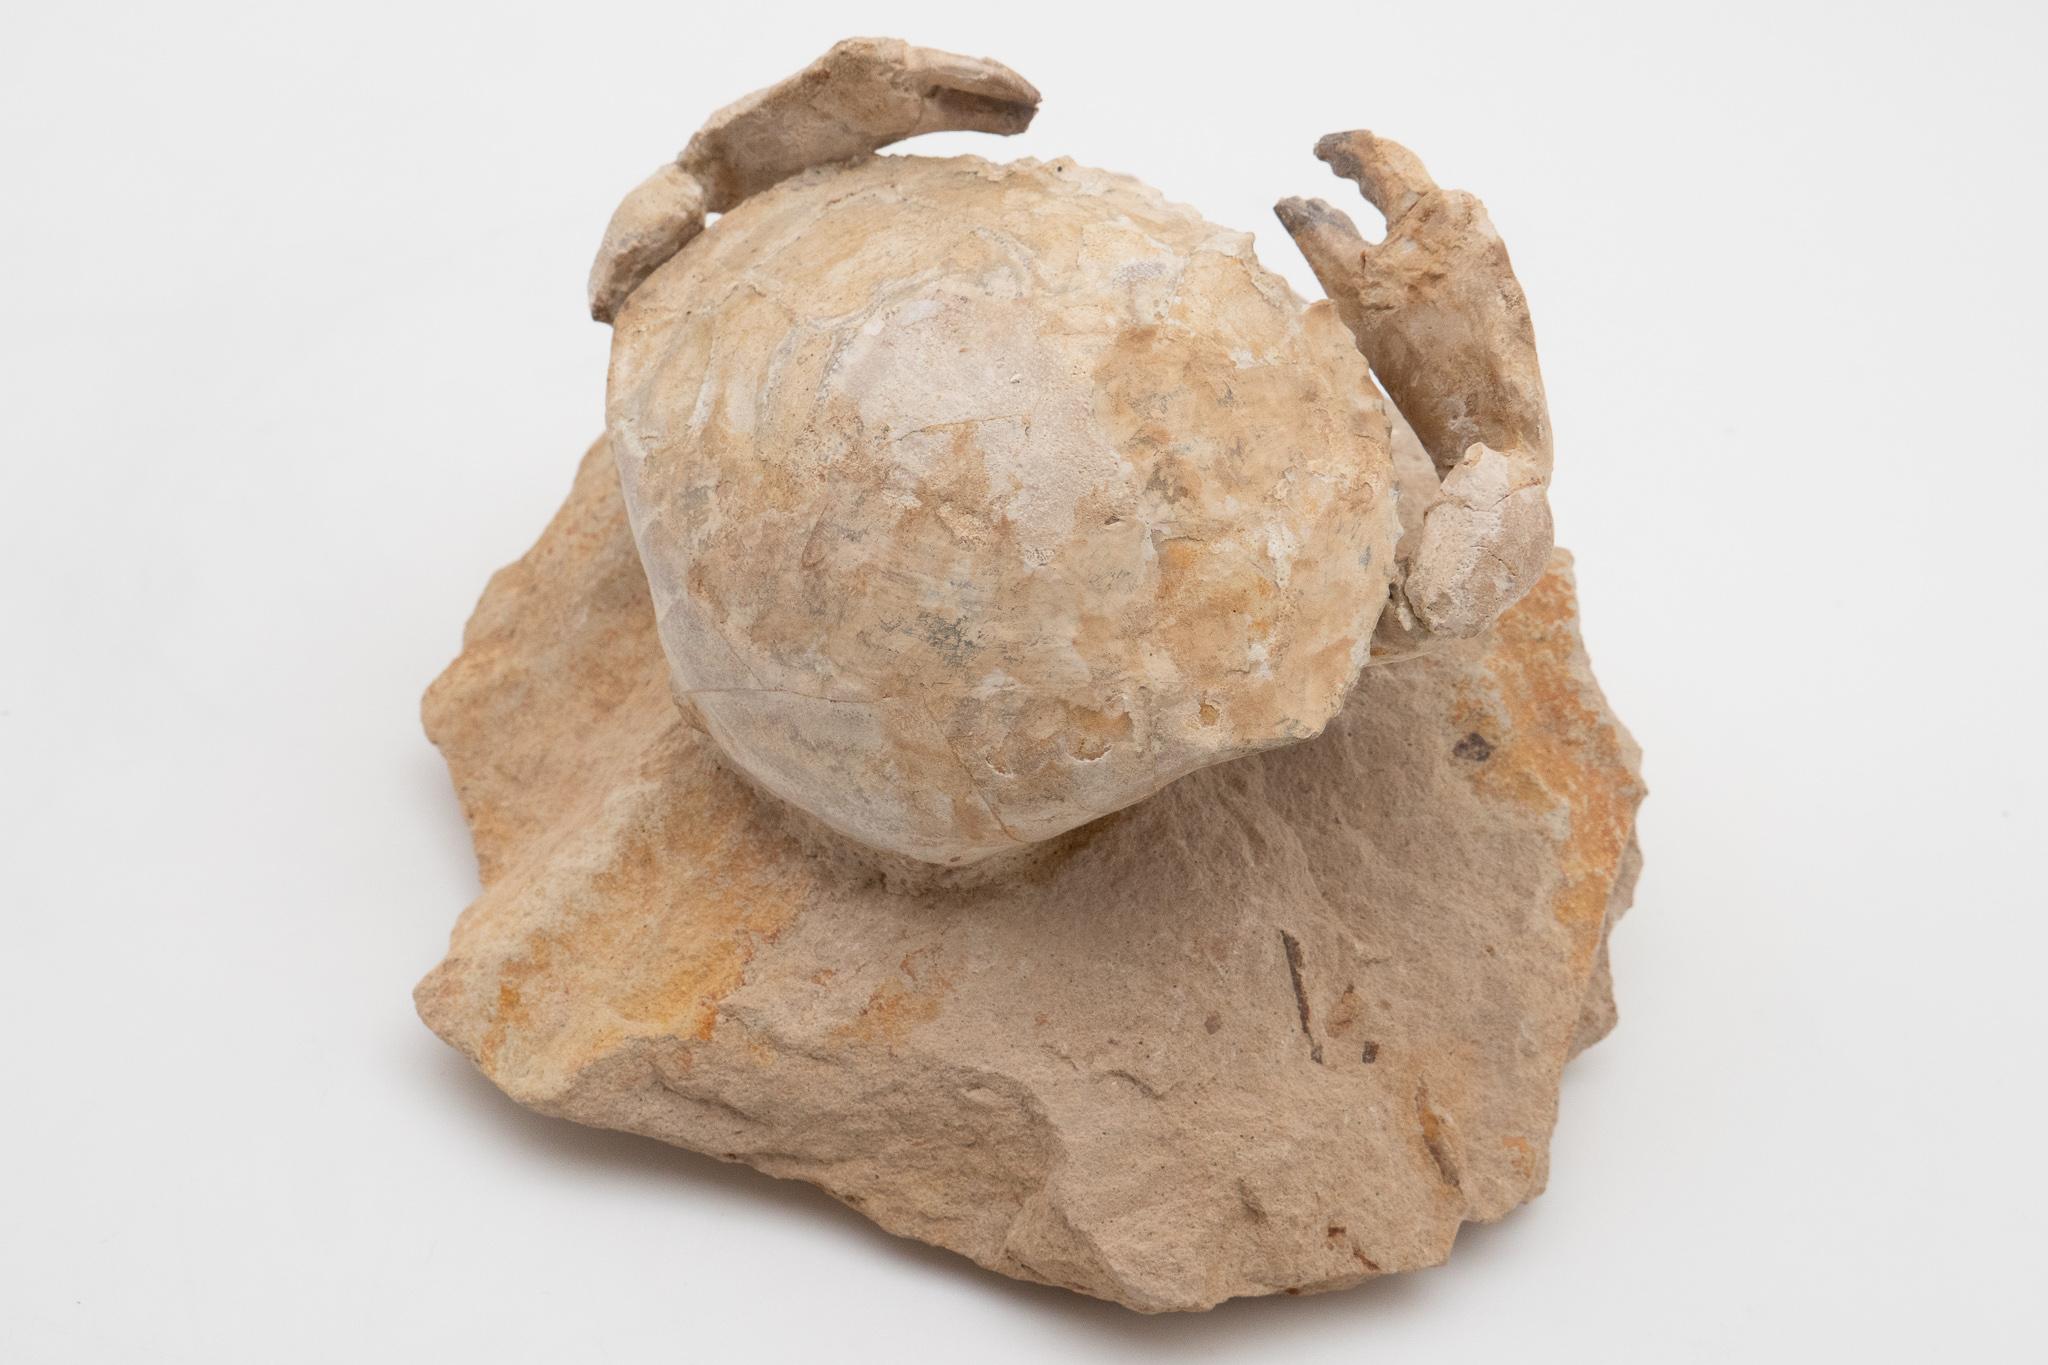 Fossilized crab perched on rock, discovered in Italy, dated to the Eocene Epoch (56 to 33.9 million years ago).